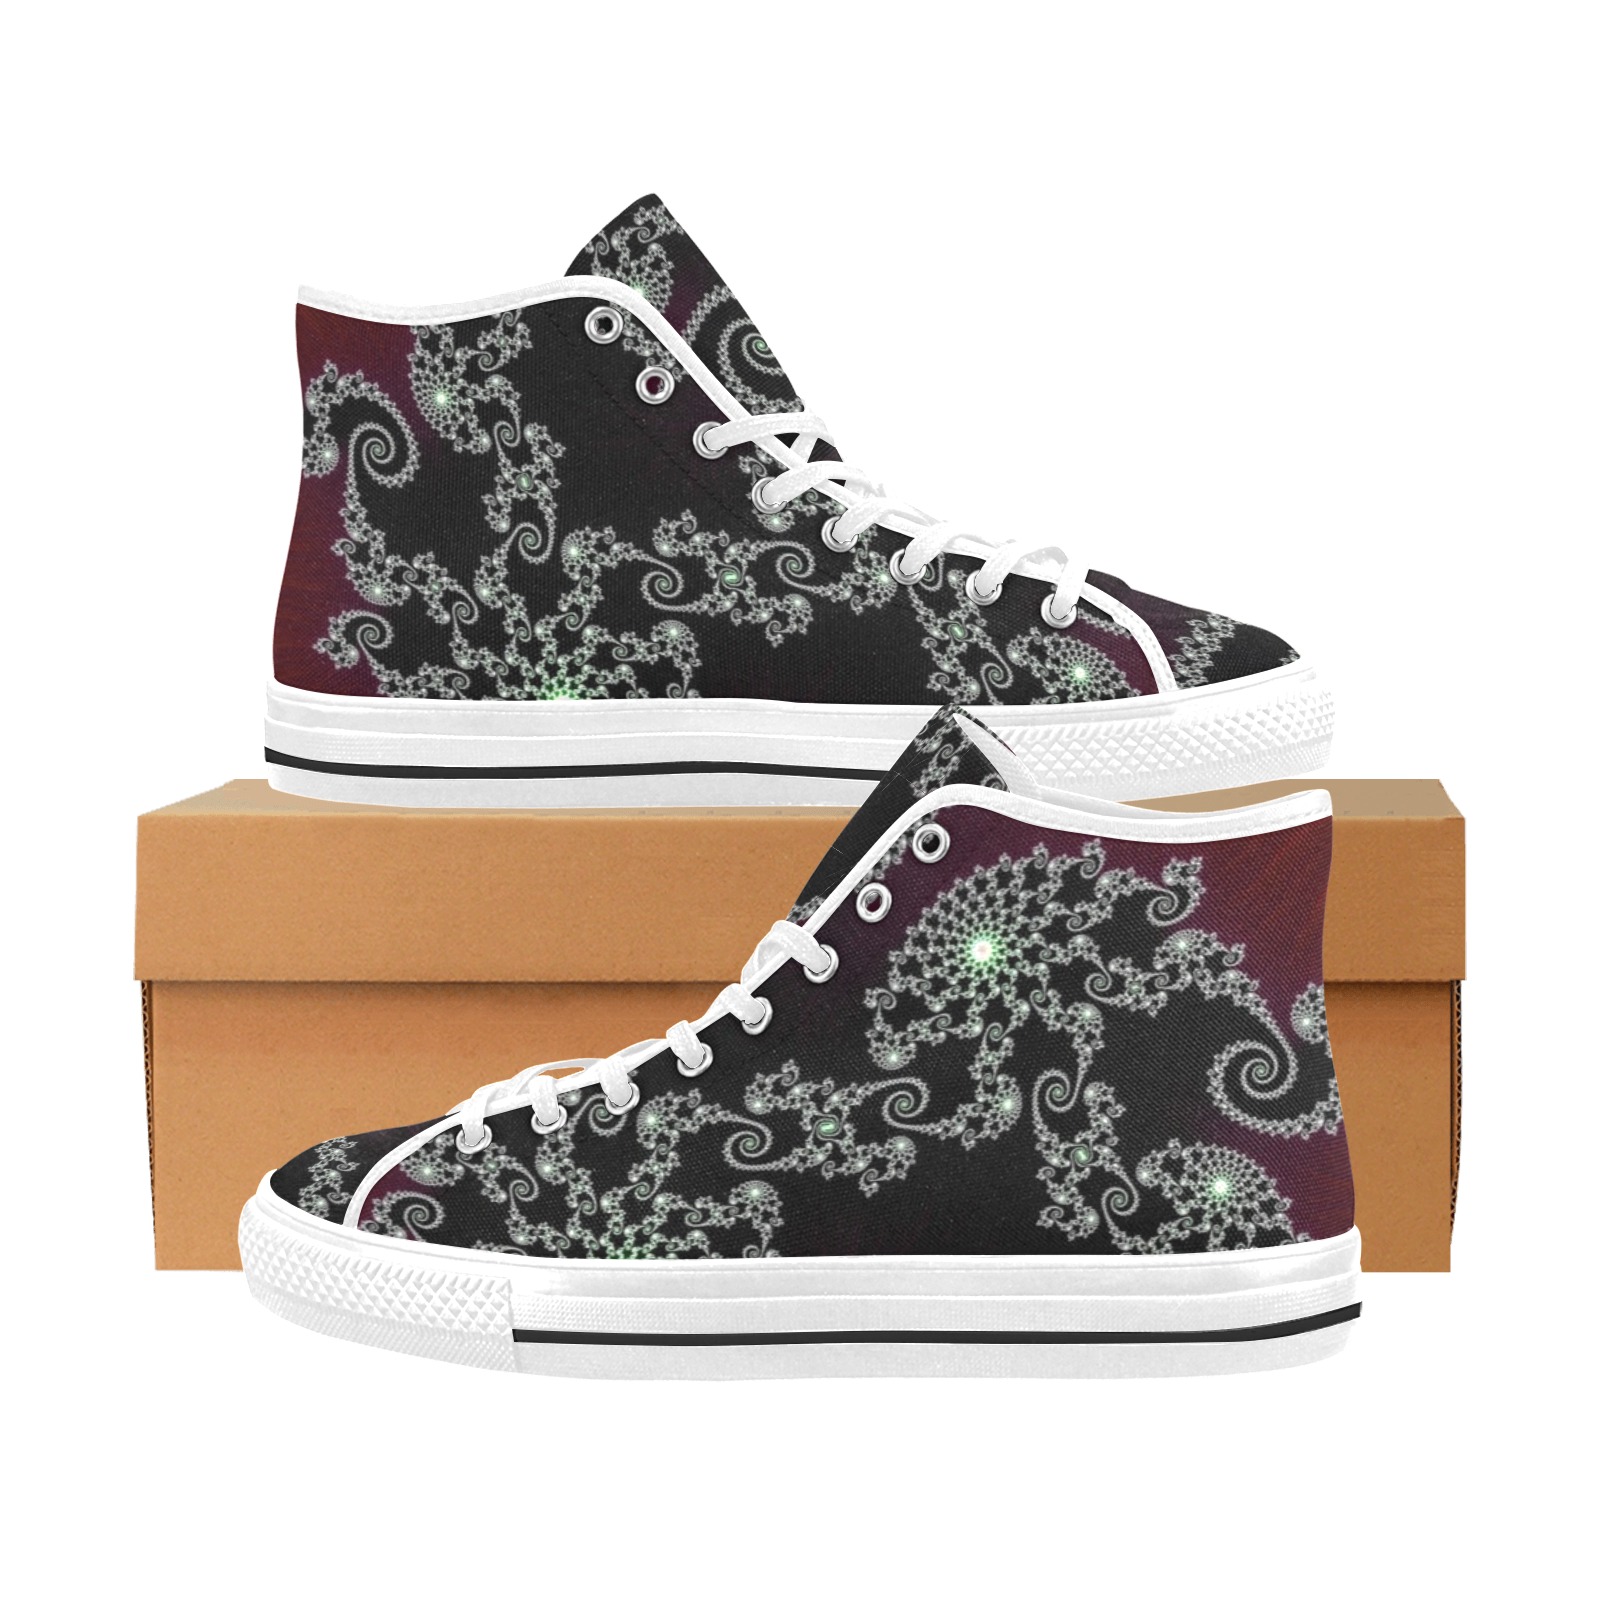 Black and White Lace on Maroon Velvet Fractal Abstract Vancouver H Women's Canvas Shoes (1013-1)